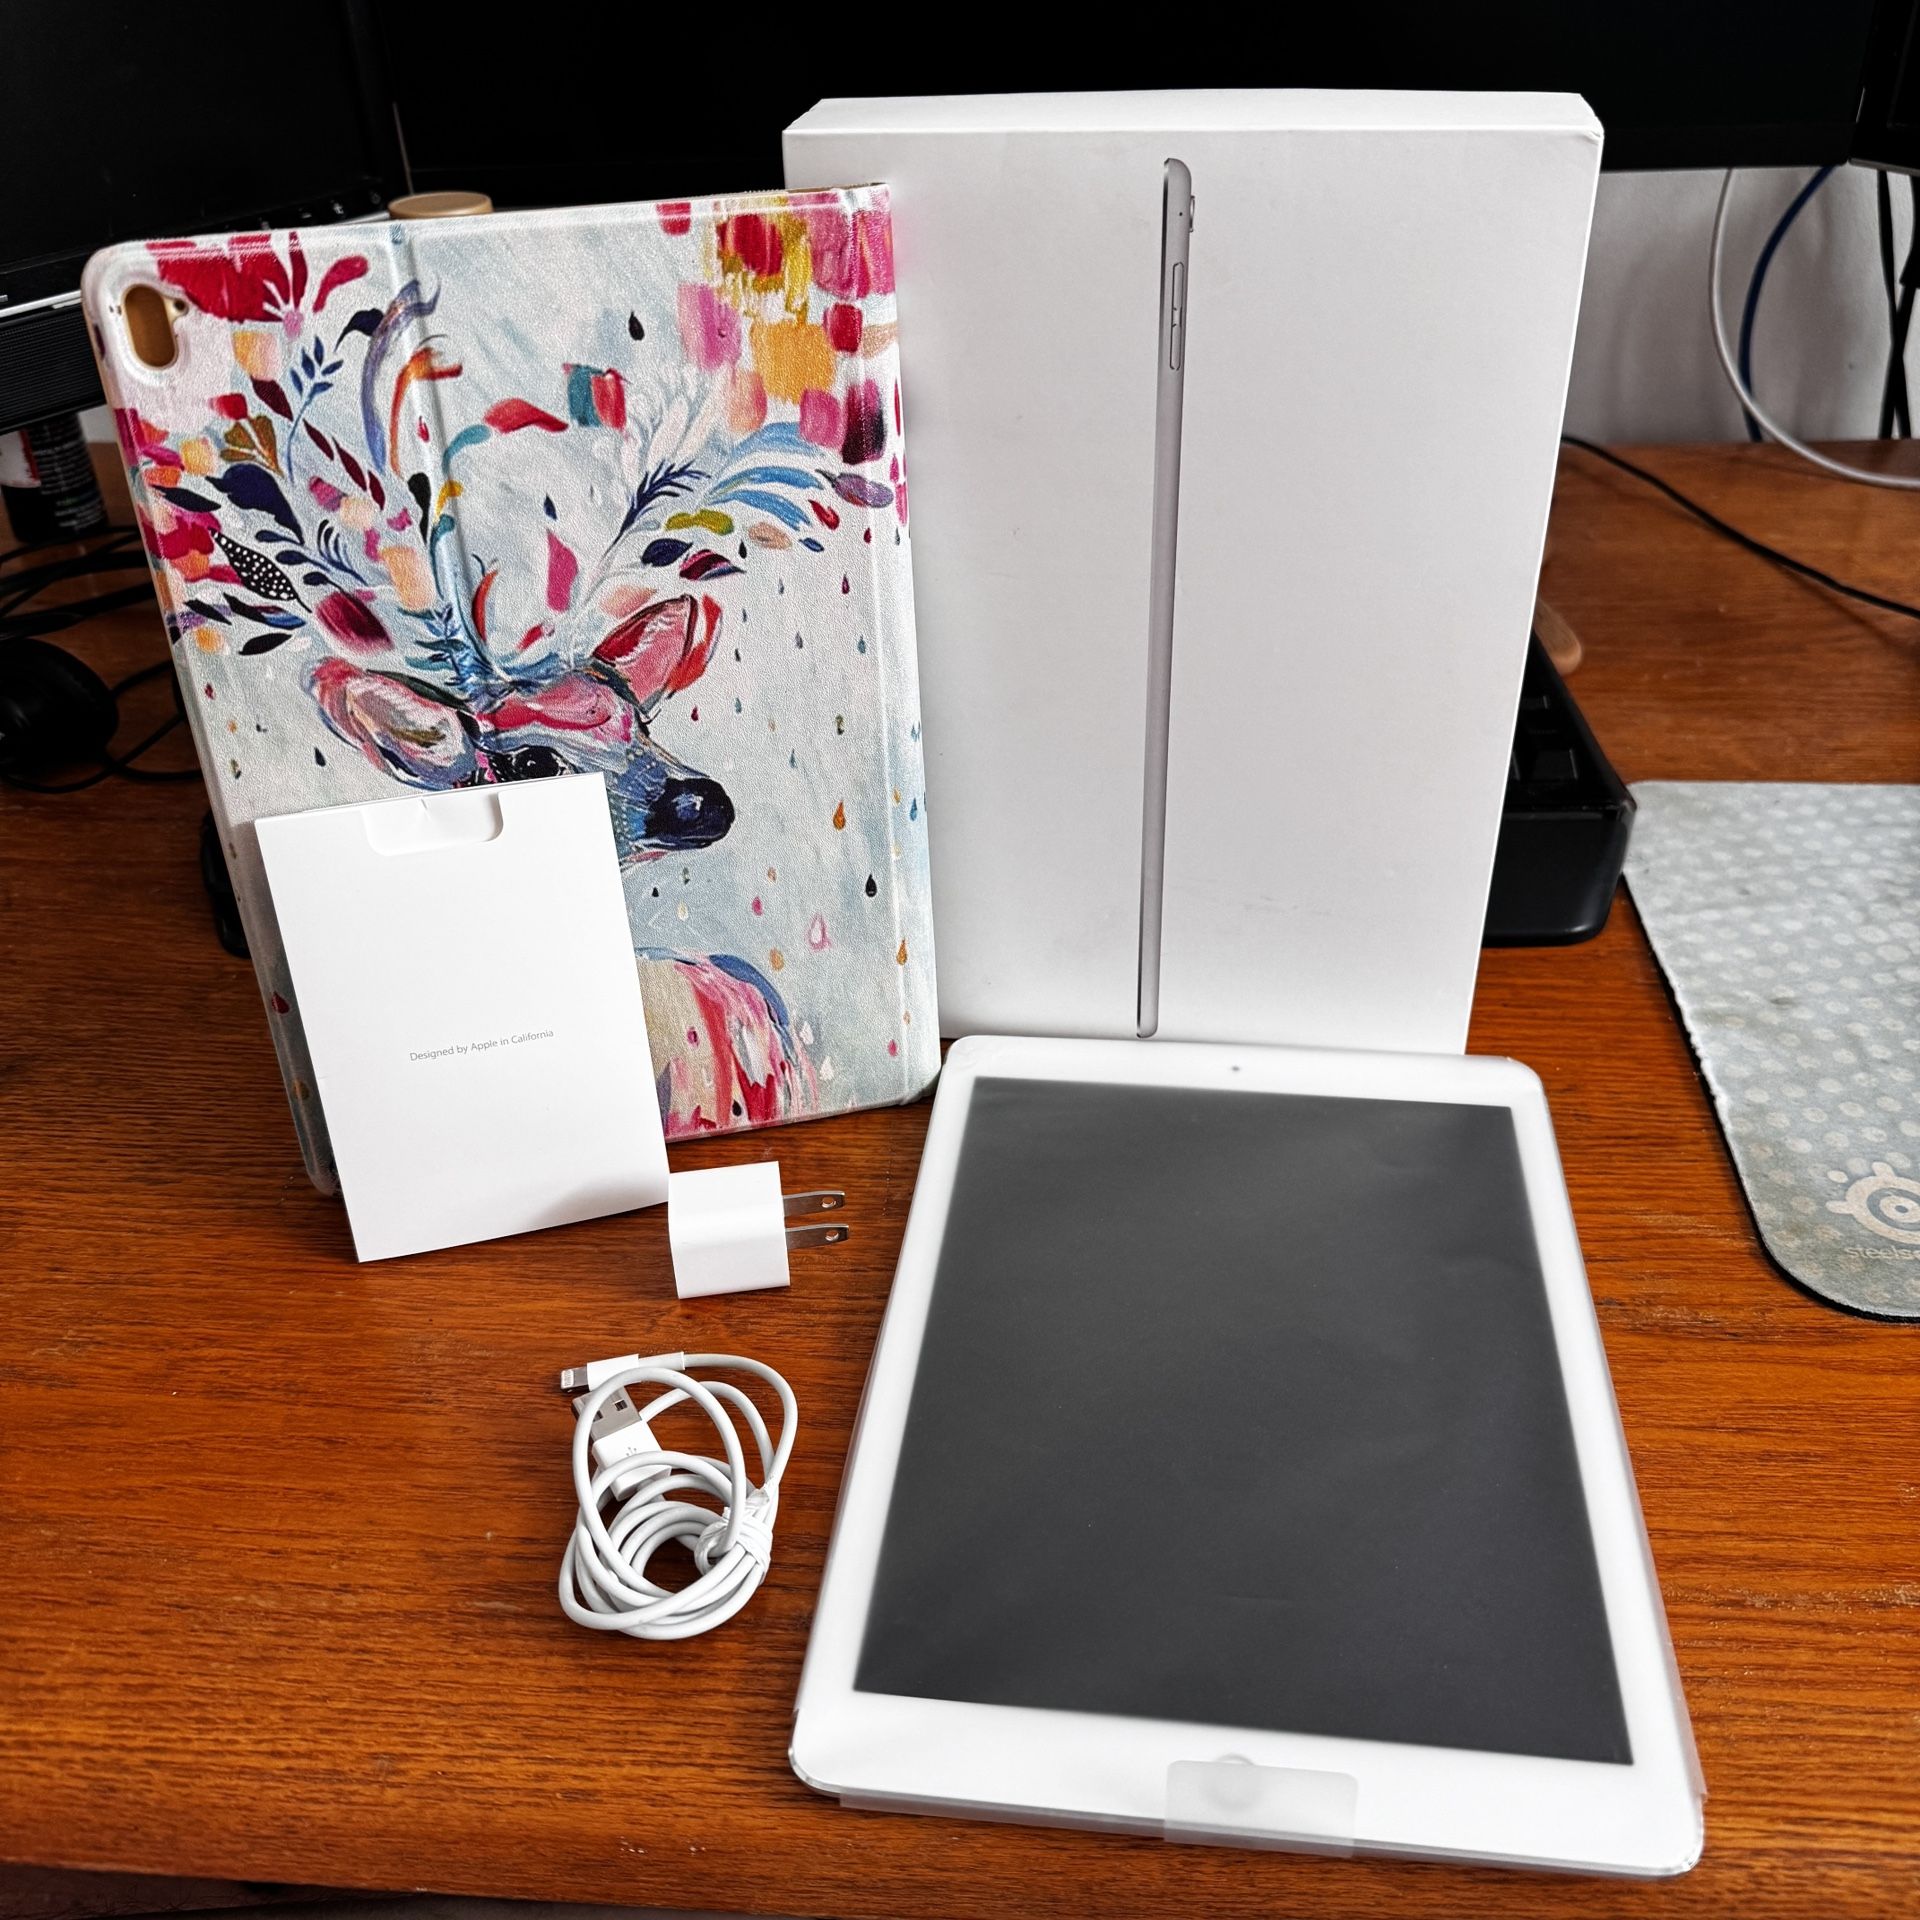 iPad Pro 9.7 Inch 32GB Wi-Fi Apple iPadOS 16 Tablet with box, case, charger